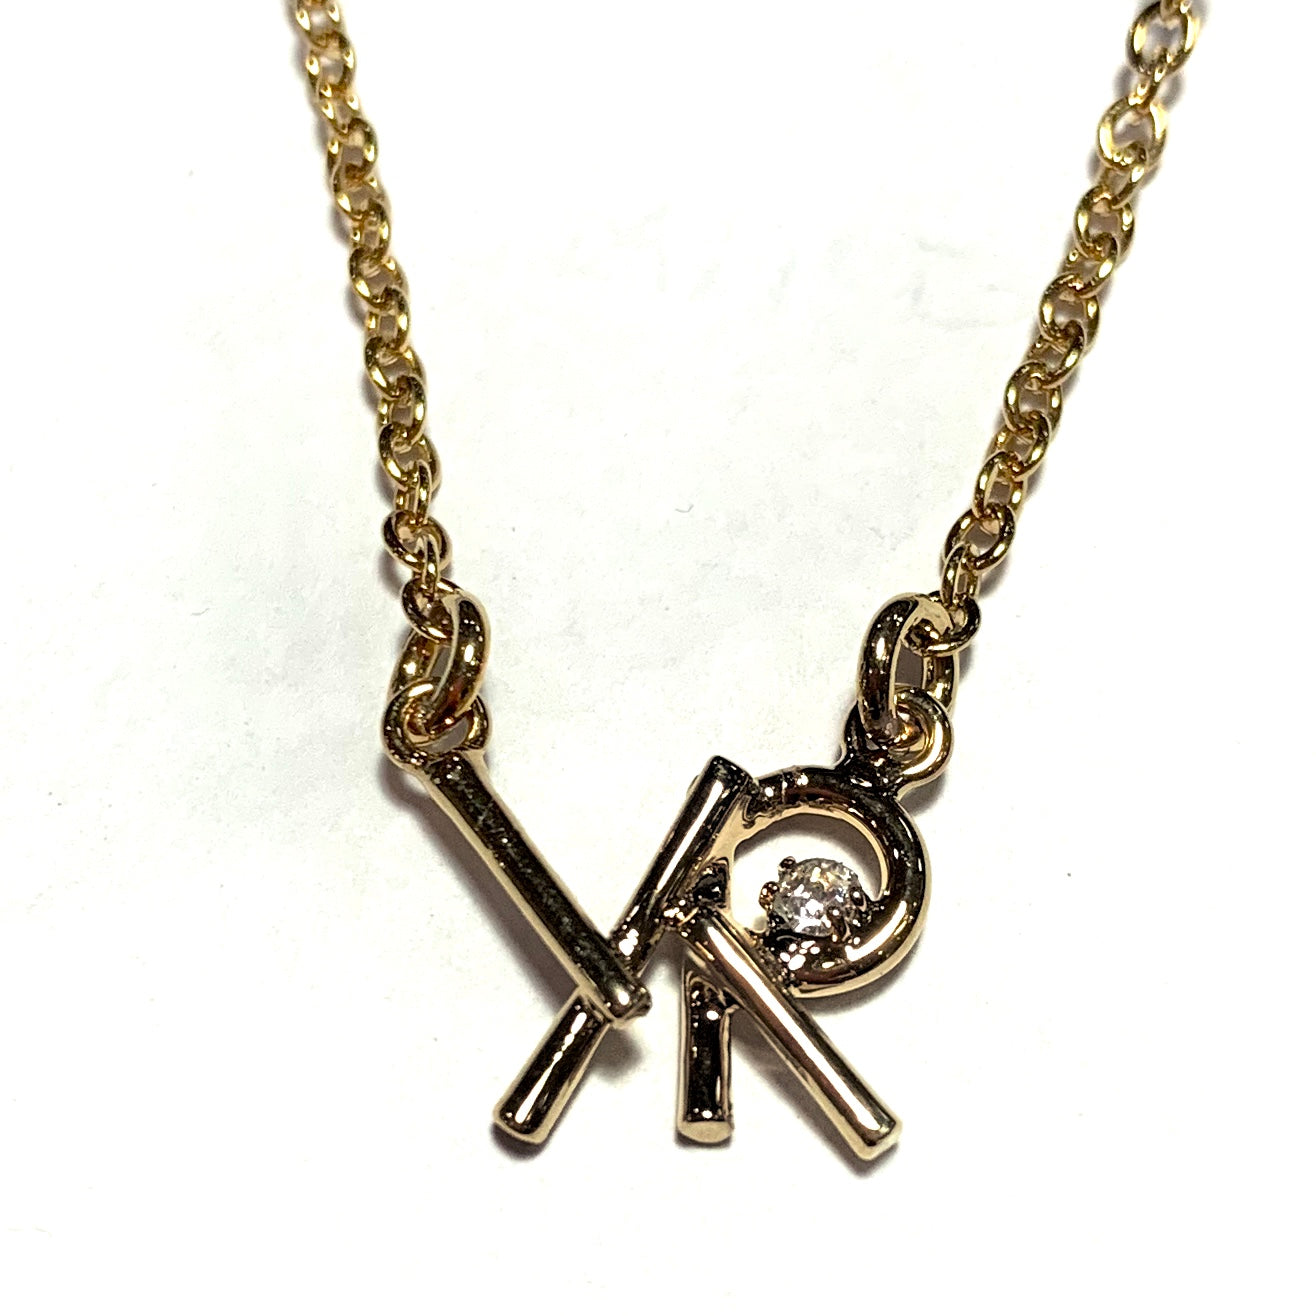 Louis-Vuitton Monogram Locket Necklace. Picture Holder with an adjustable  chain